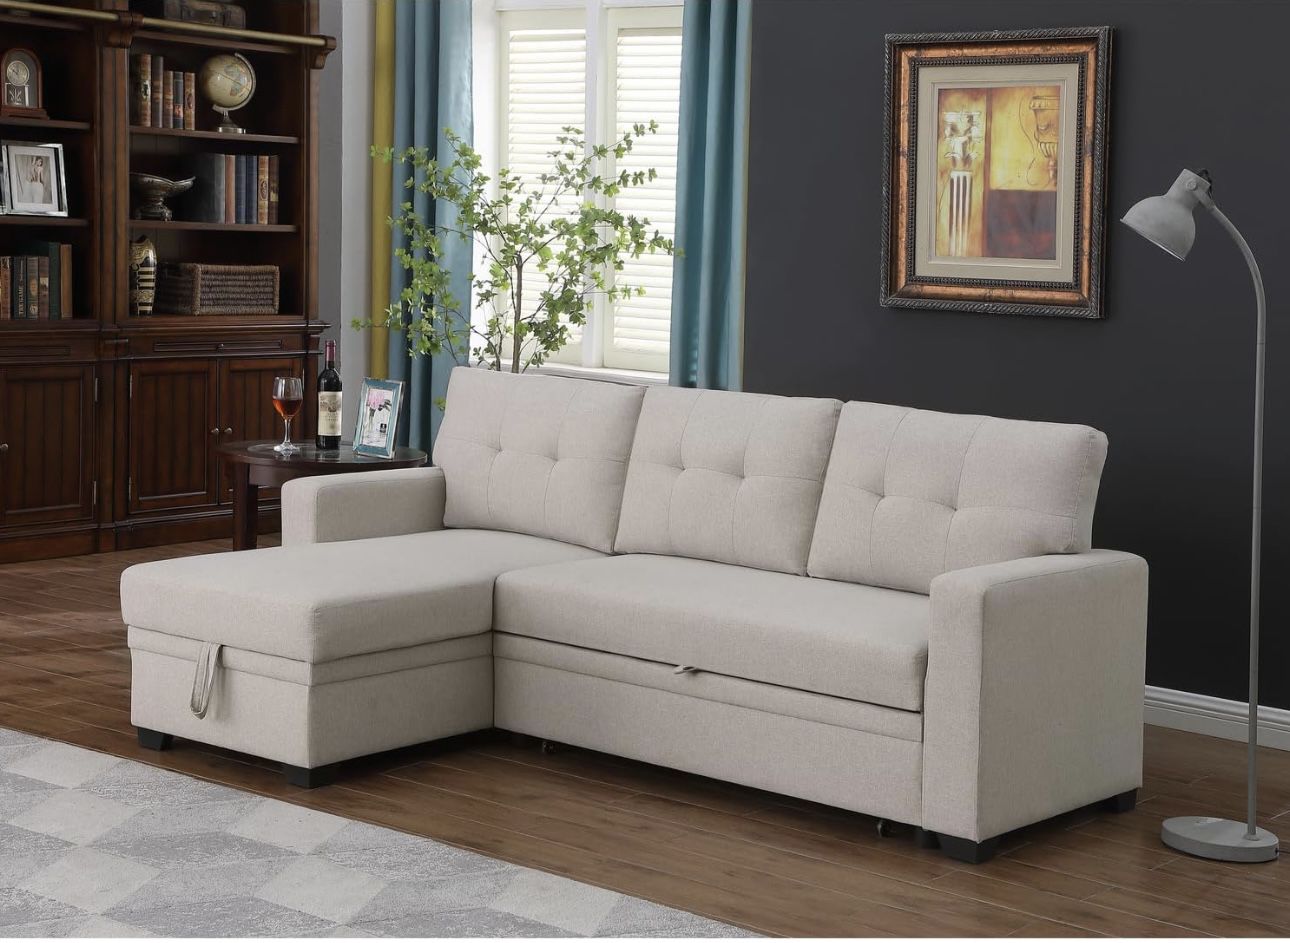 L-Shaped  sectional - Convertible Pull-Out Sleeper Sectional Sofa/Storage Chaise